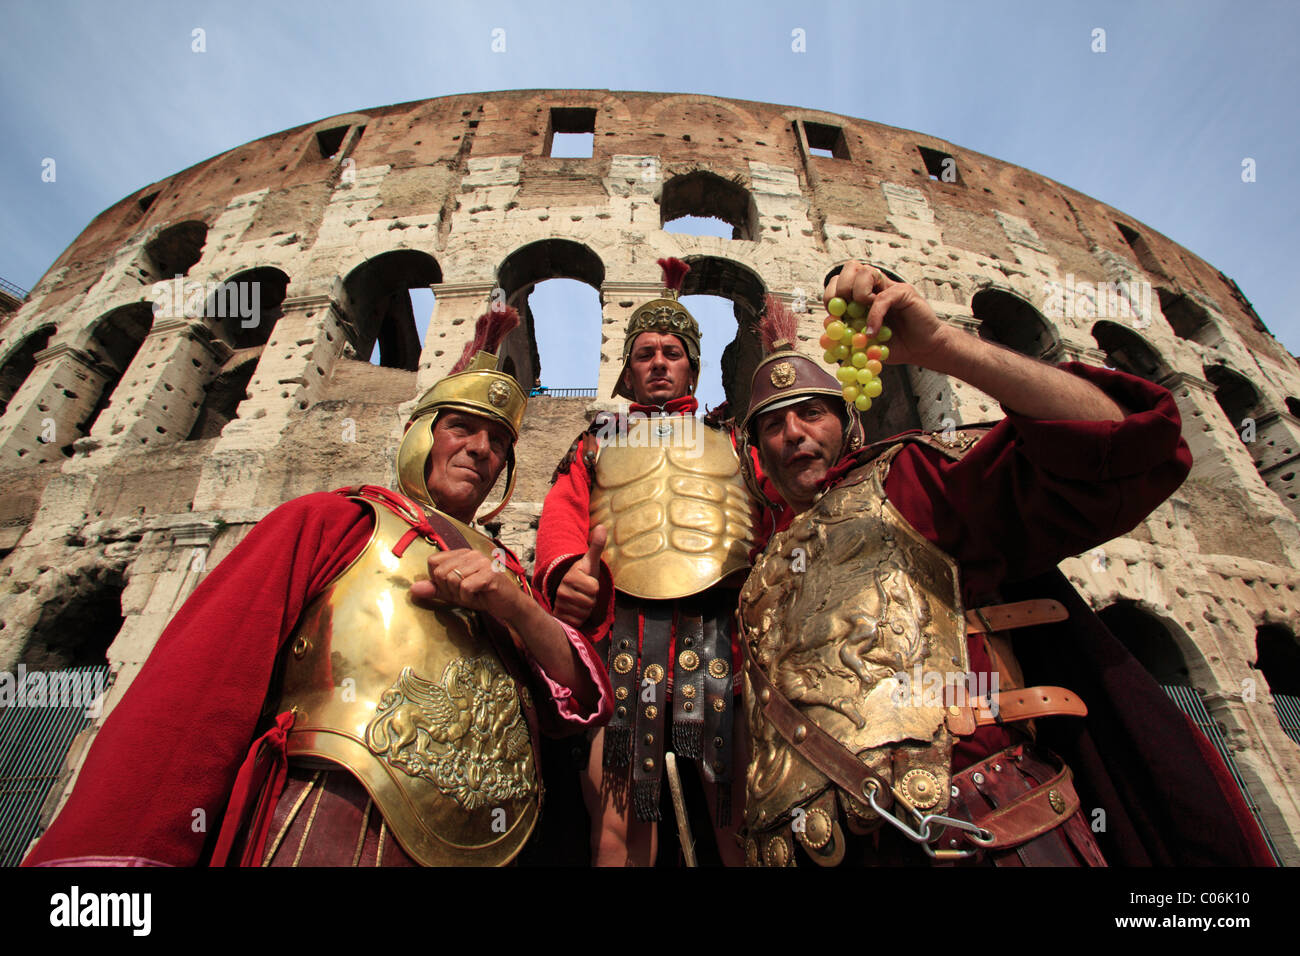 Actors dressed as gladiators in front of the Colosseum, Rome, Italy, Europe Stock Photo